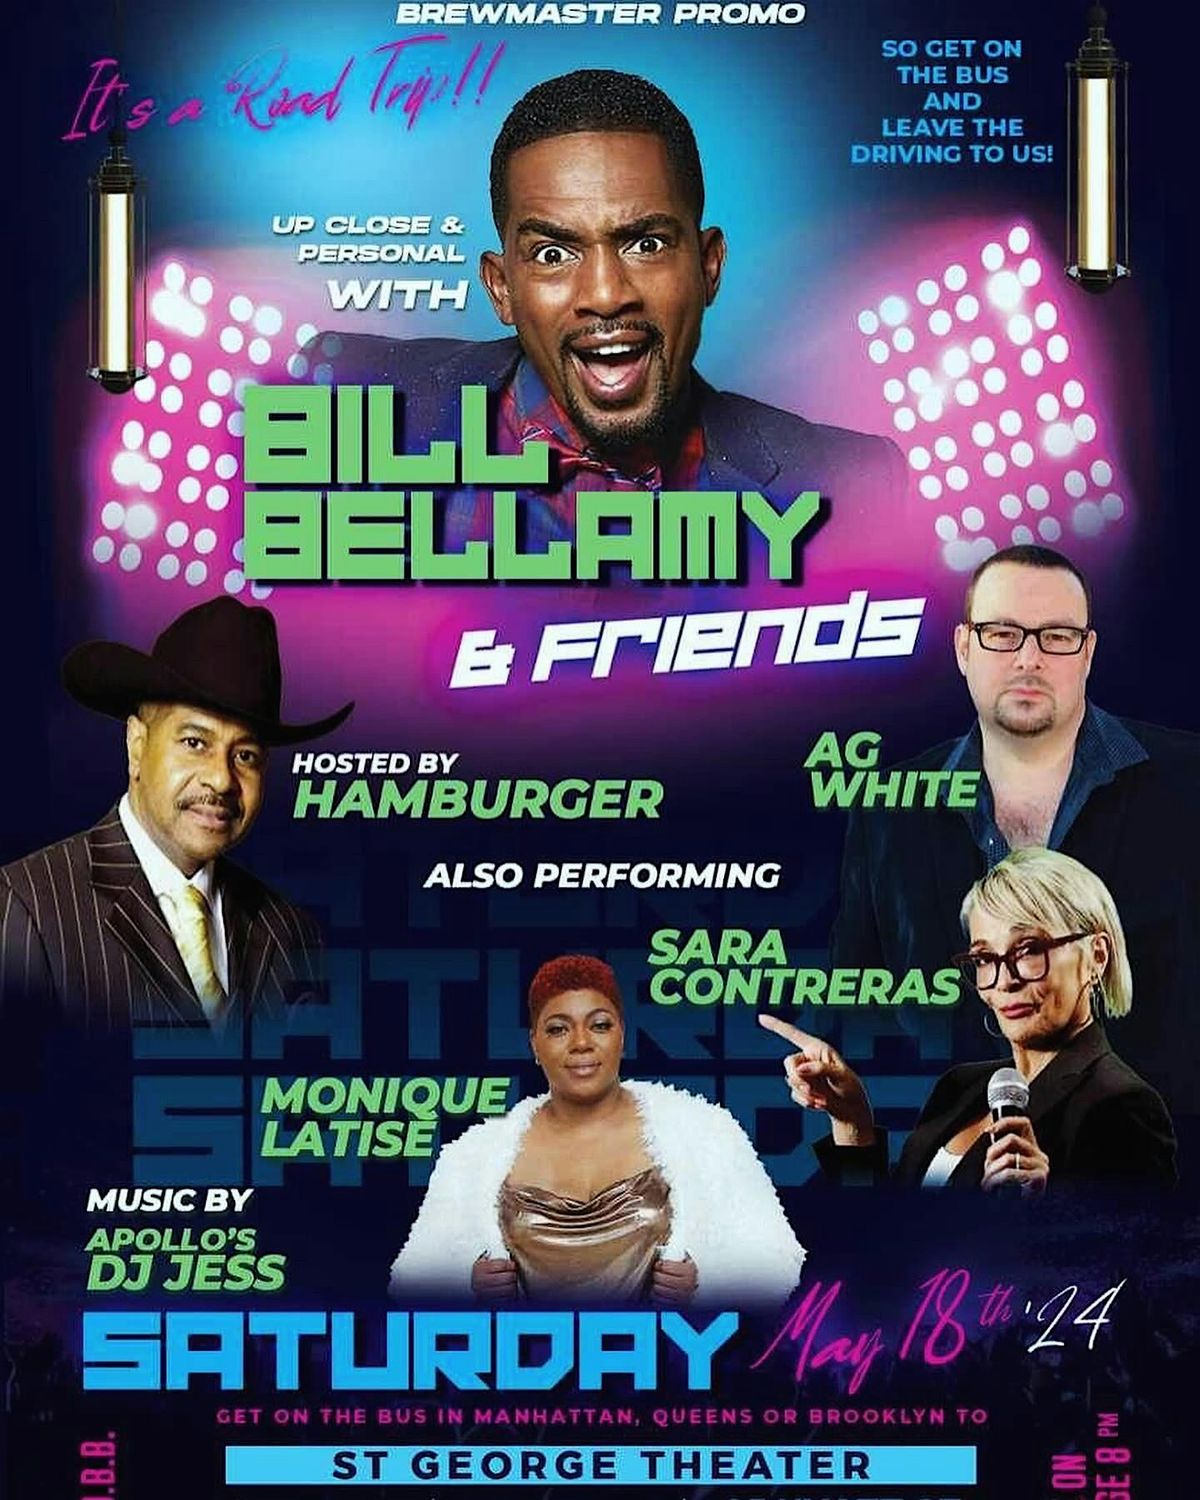 Class Action Prods Presents Mr Funny Man Bill Bellamy Up Close and Personal